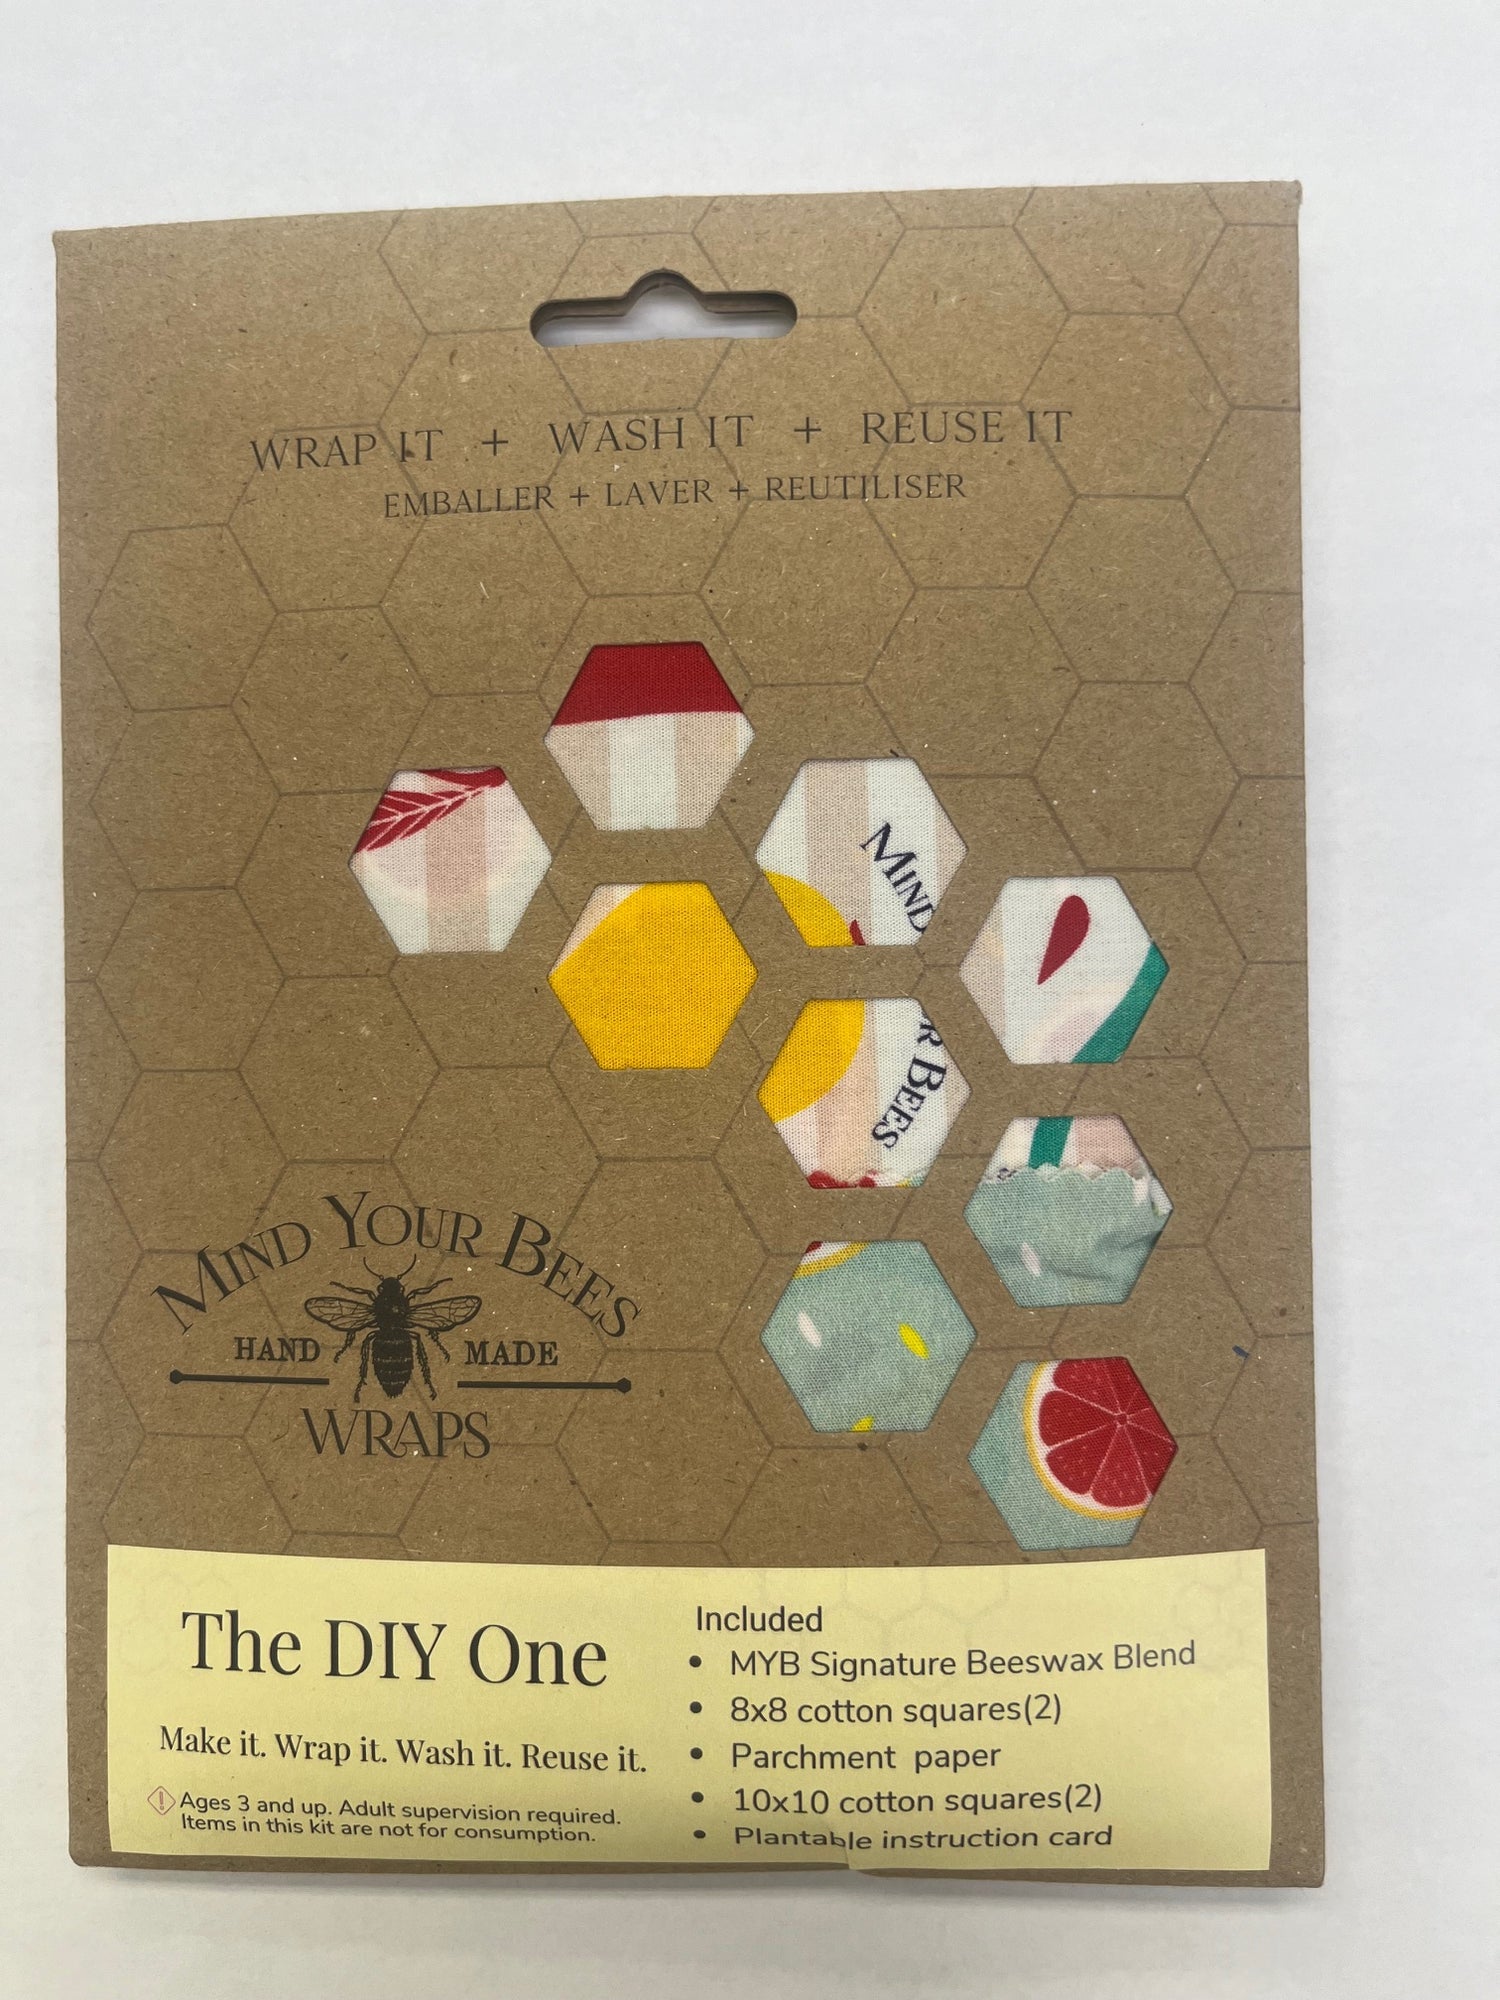 Beeswax food wraps do it yourself kit mind your bees front view sample 1